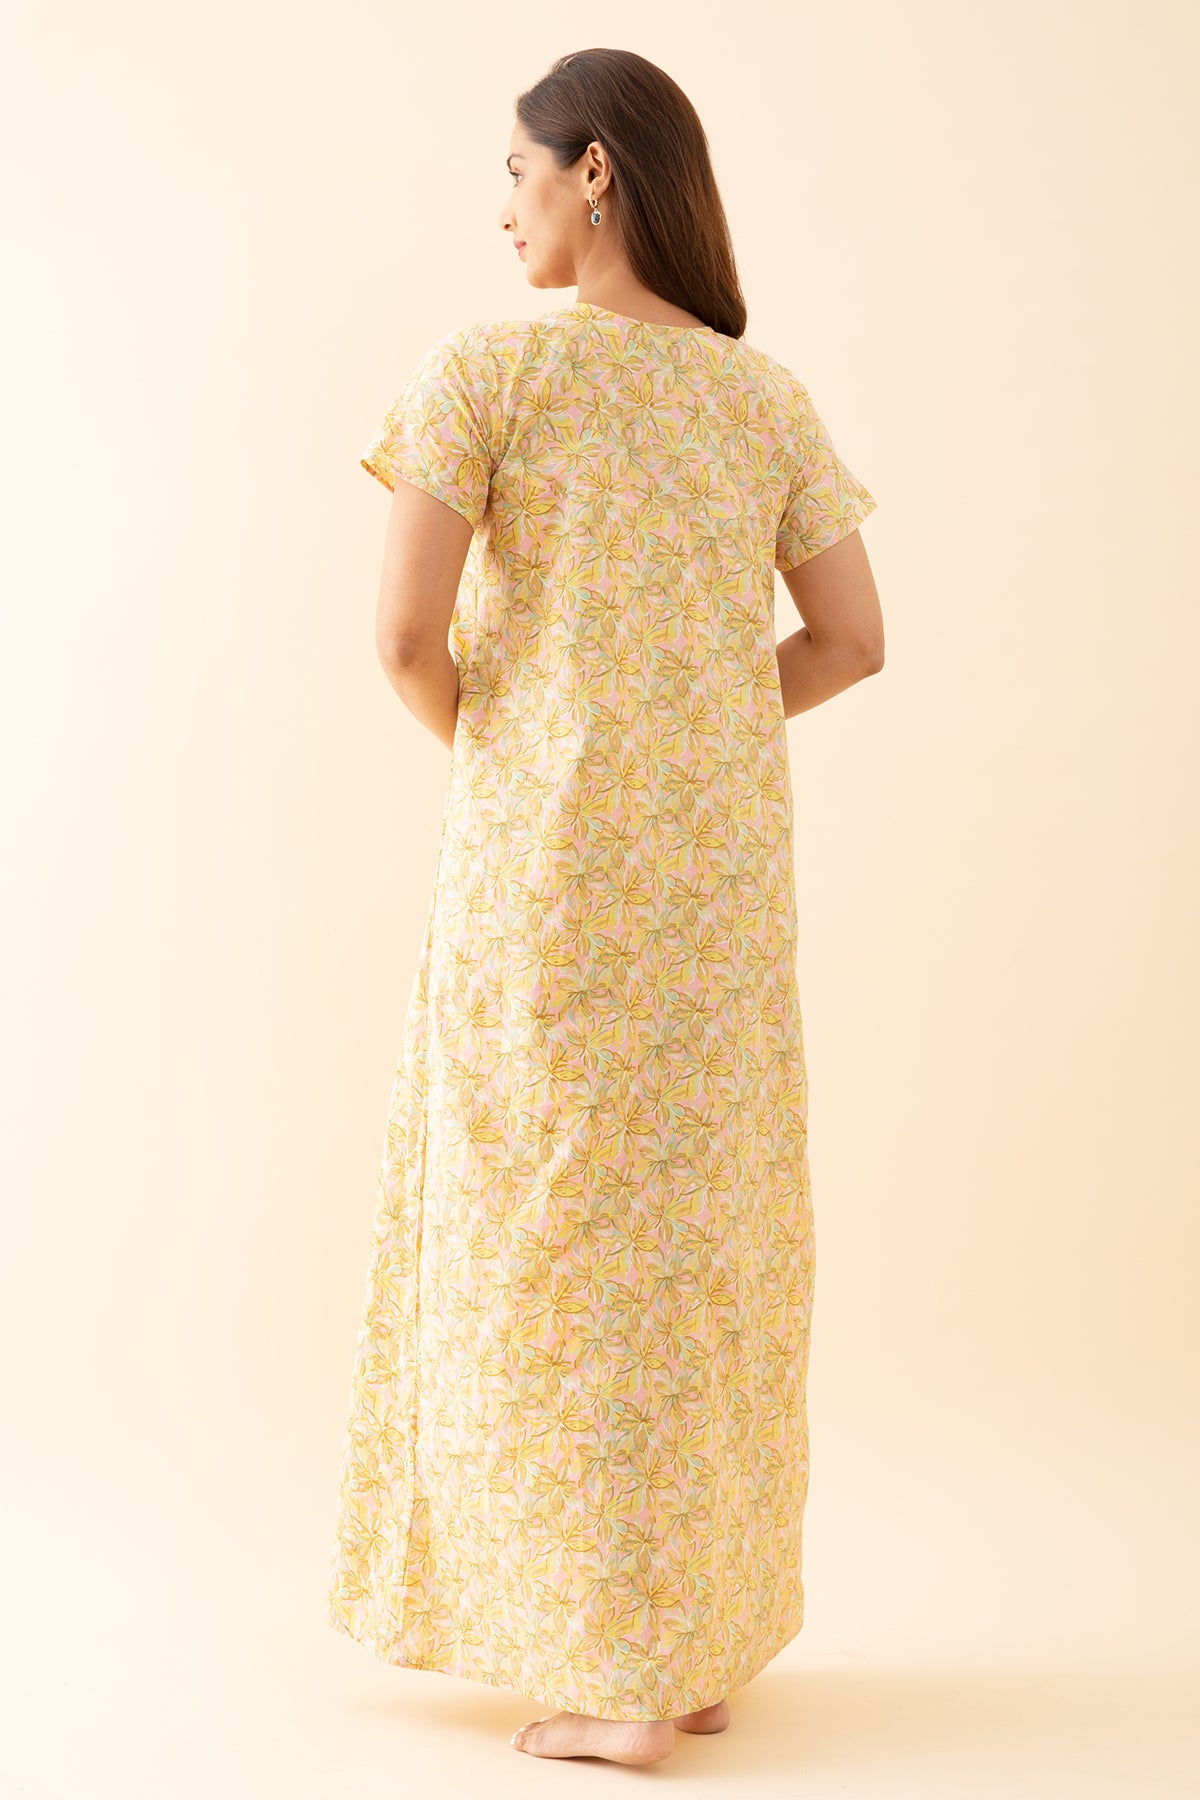 Buttercup Floral Printed Nighty with Stripes Printed Yoke Pink